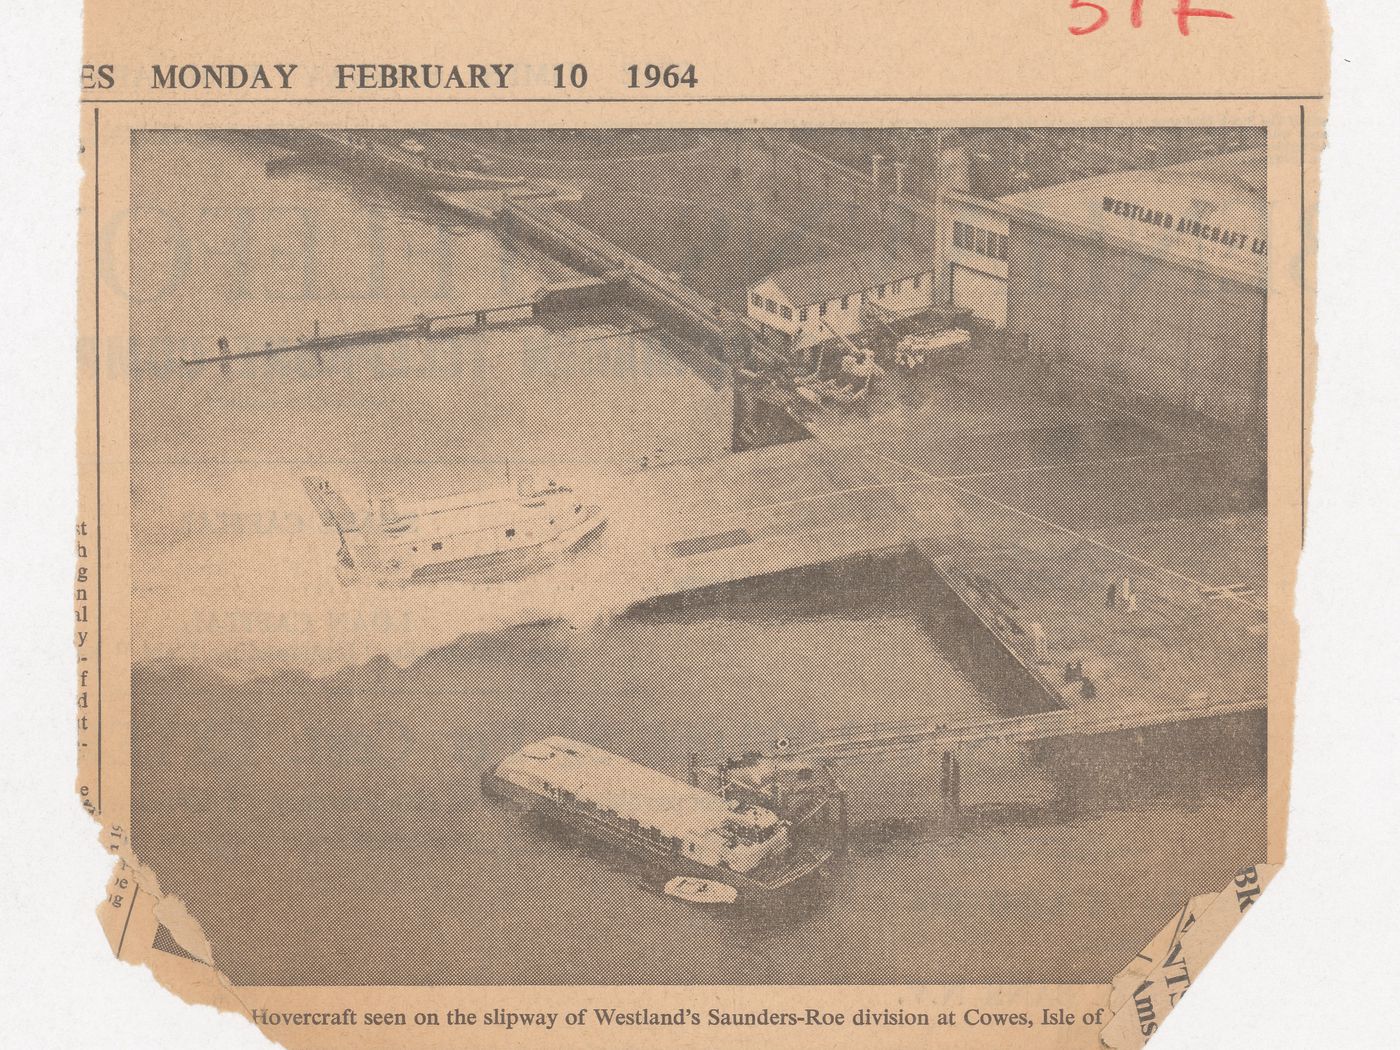 Newspaper clipping showing a photo of a hovercraft on the slipway of Westland's Saunders-Roe division